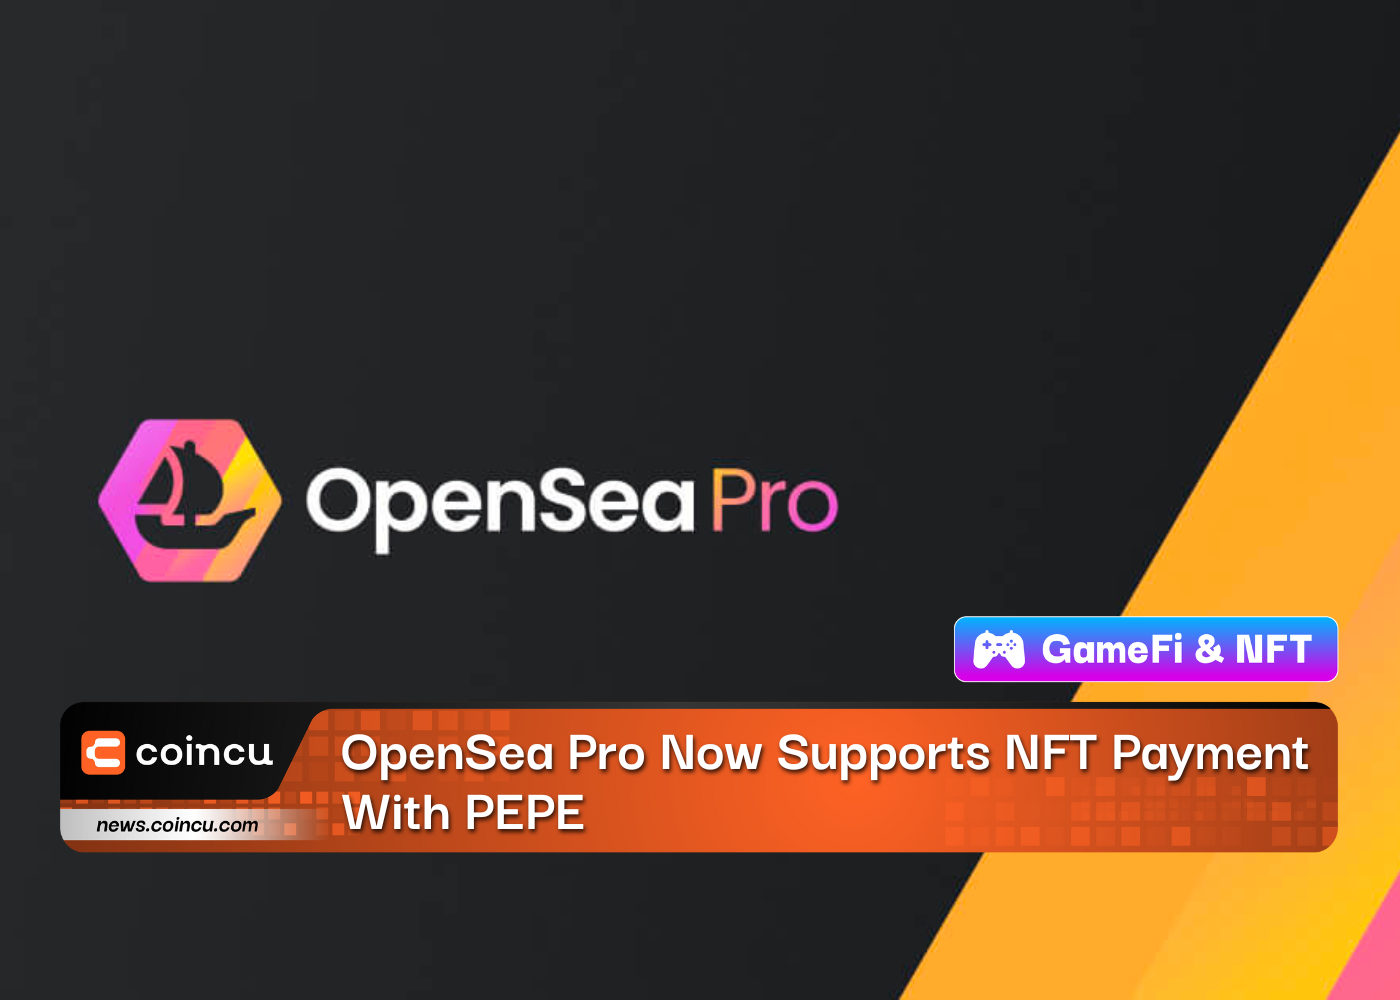 OpenSea Pro Now Supports NFT Payment With PEPE